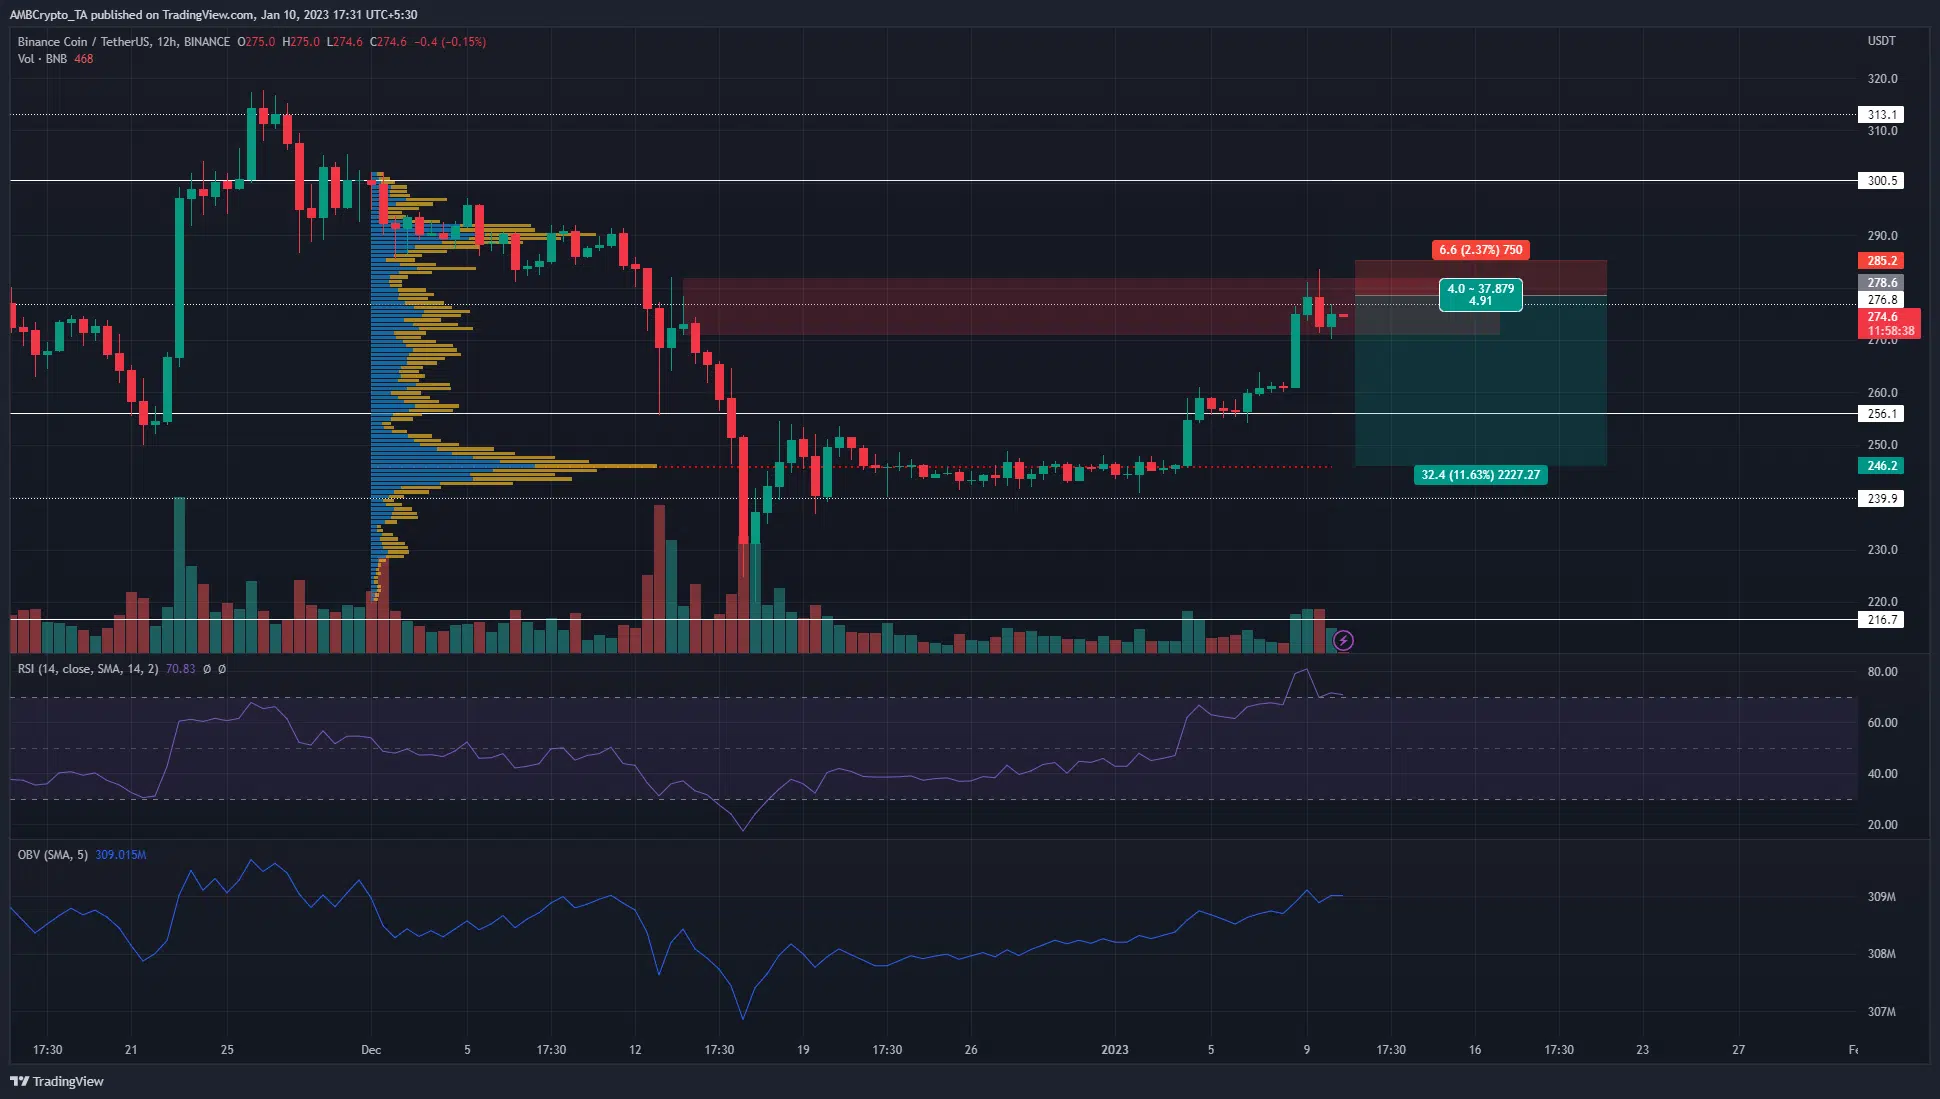 Binance Coin reaches another resistance zone but bulls have the upper hand